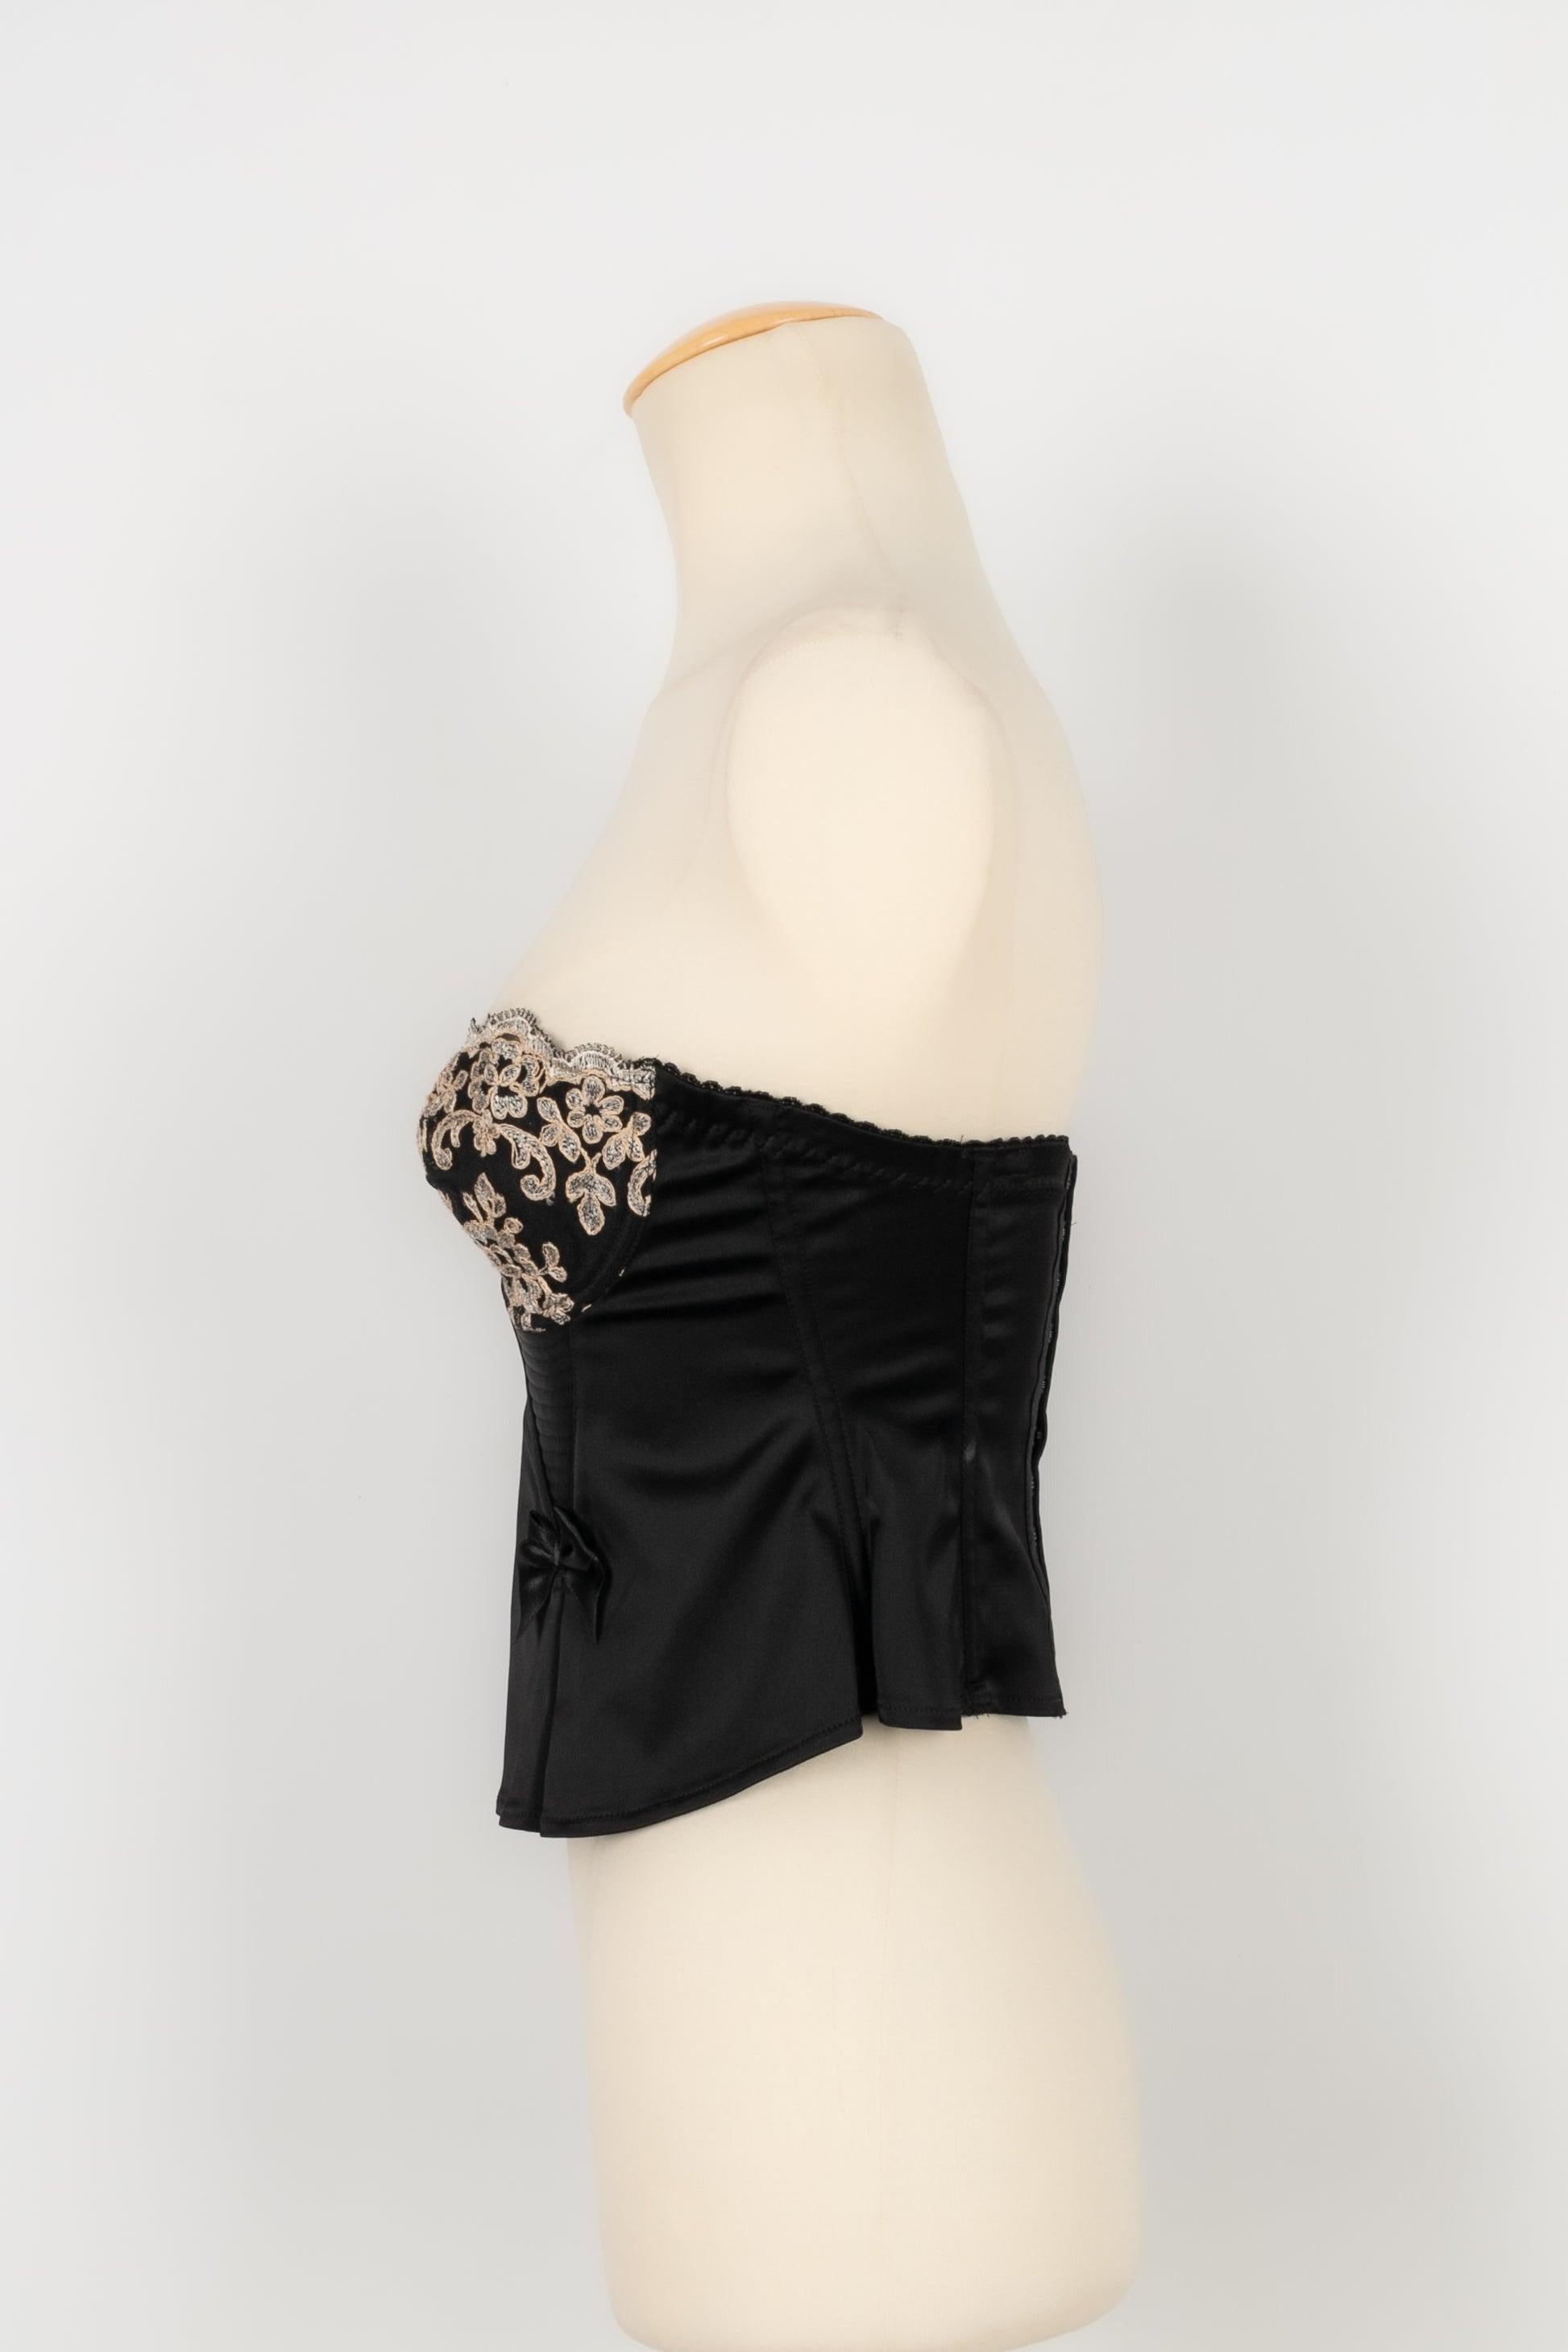 Nina Ricci - (Made in France) Black bustier top with embroidery decorations around the chest. Indicated size 85, it fits a 36FR

Additional information:
Condition: Very good condition
Dimensions: Chest: 40 cm
Waist: 30 cm
Length: 29 cm

Seller